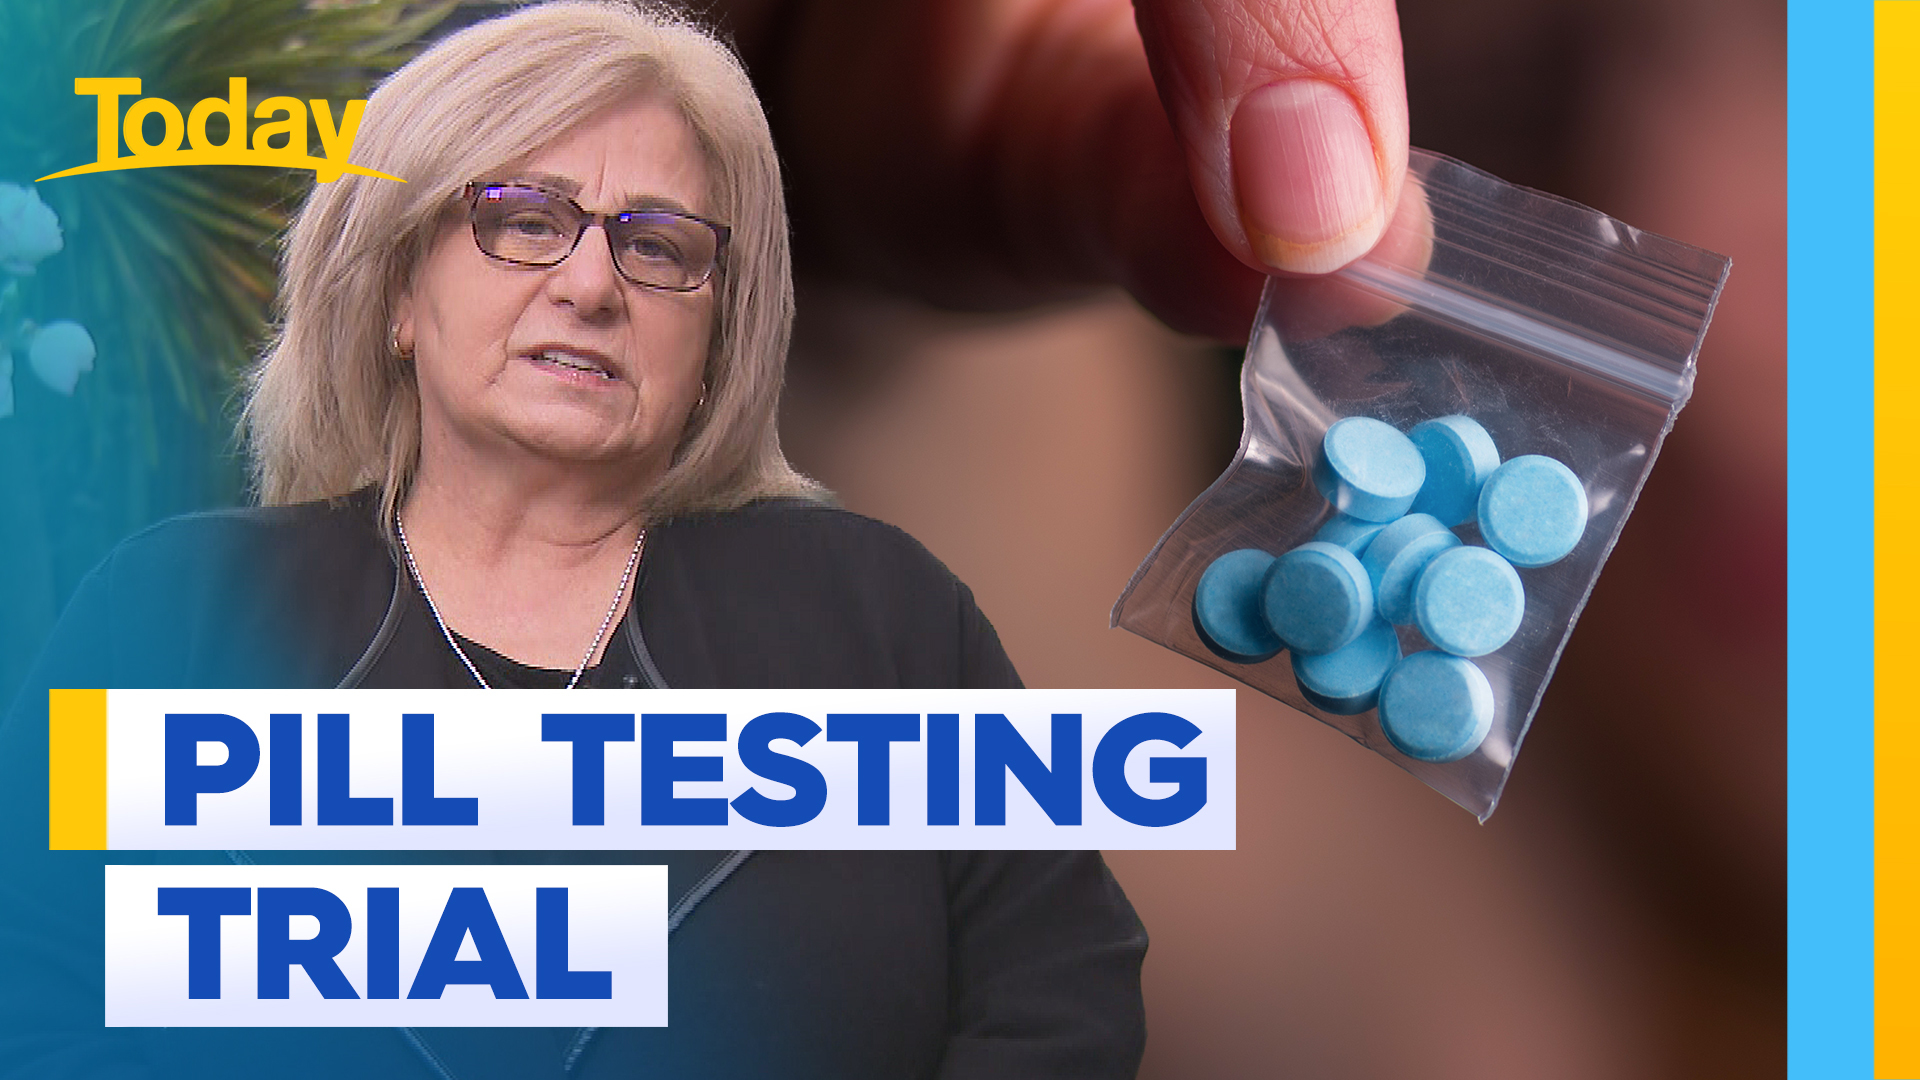 Pill testing trial gets greenlit in Victoria